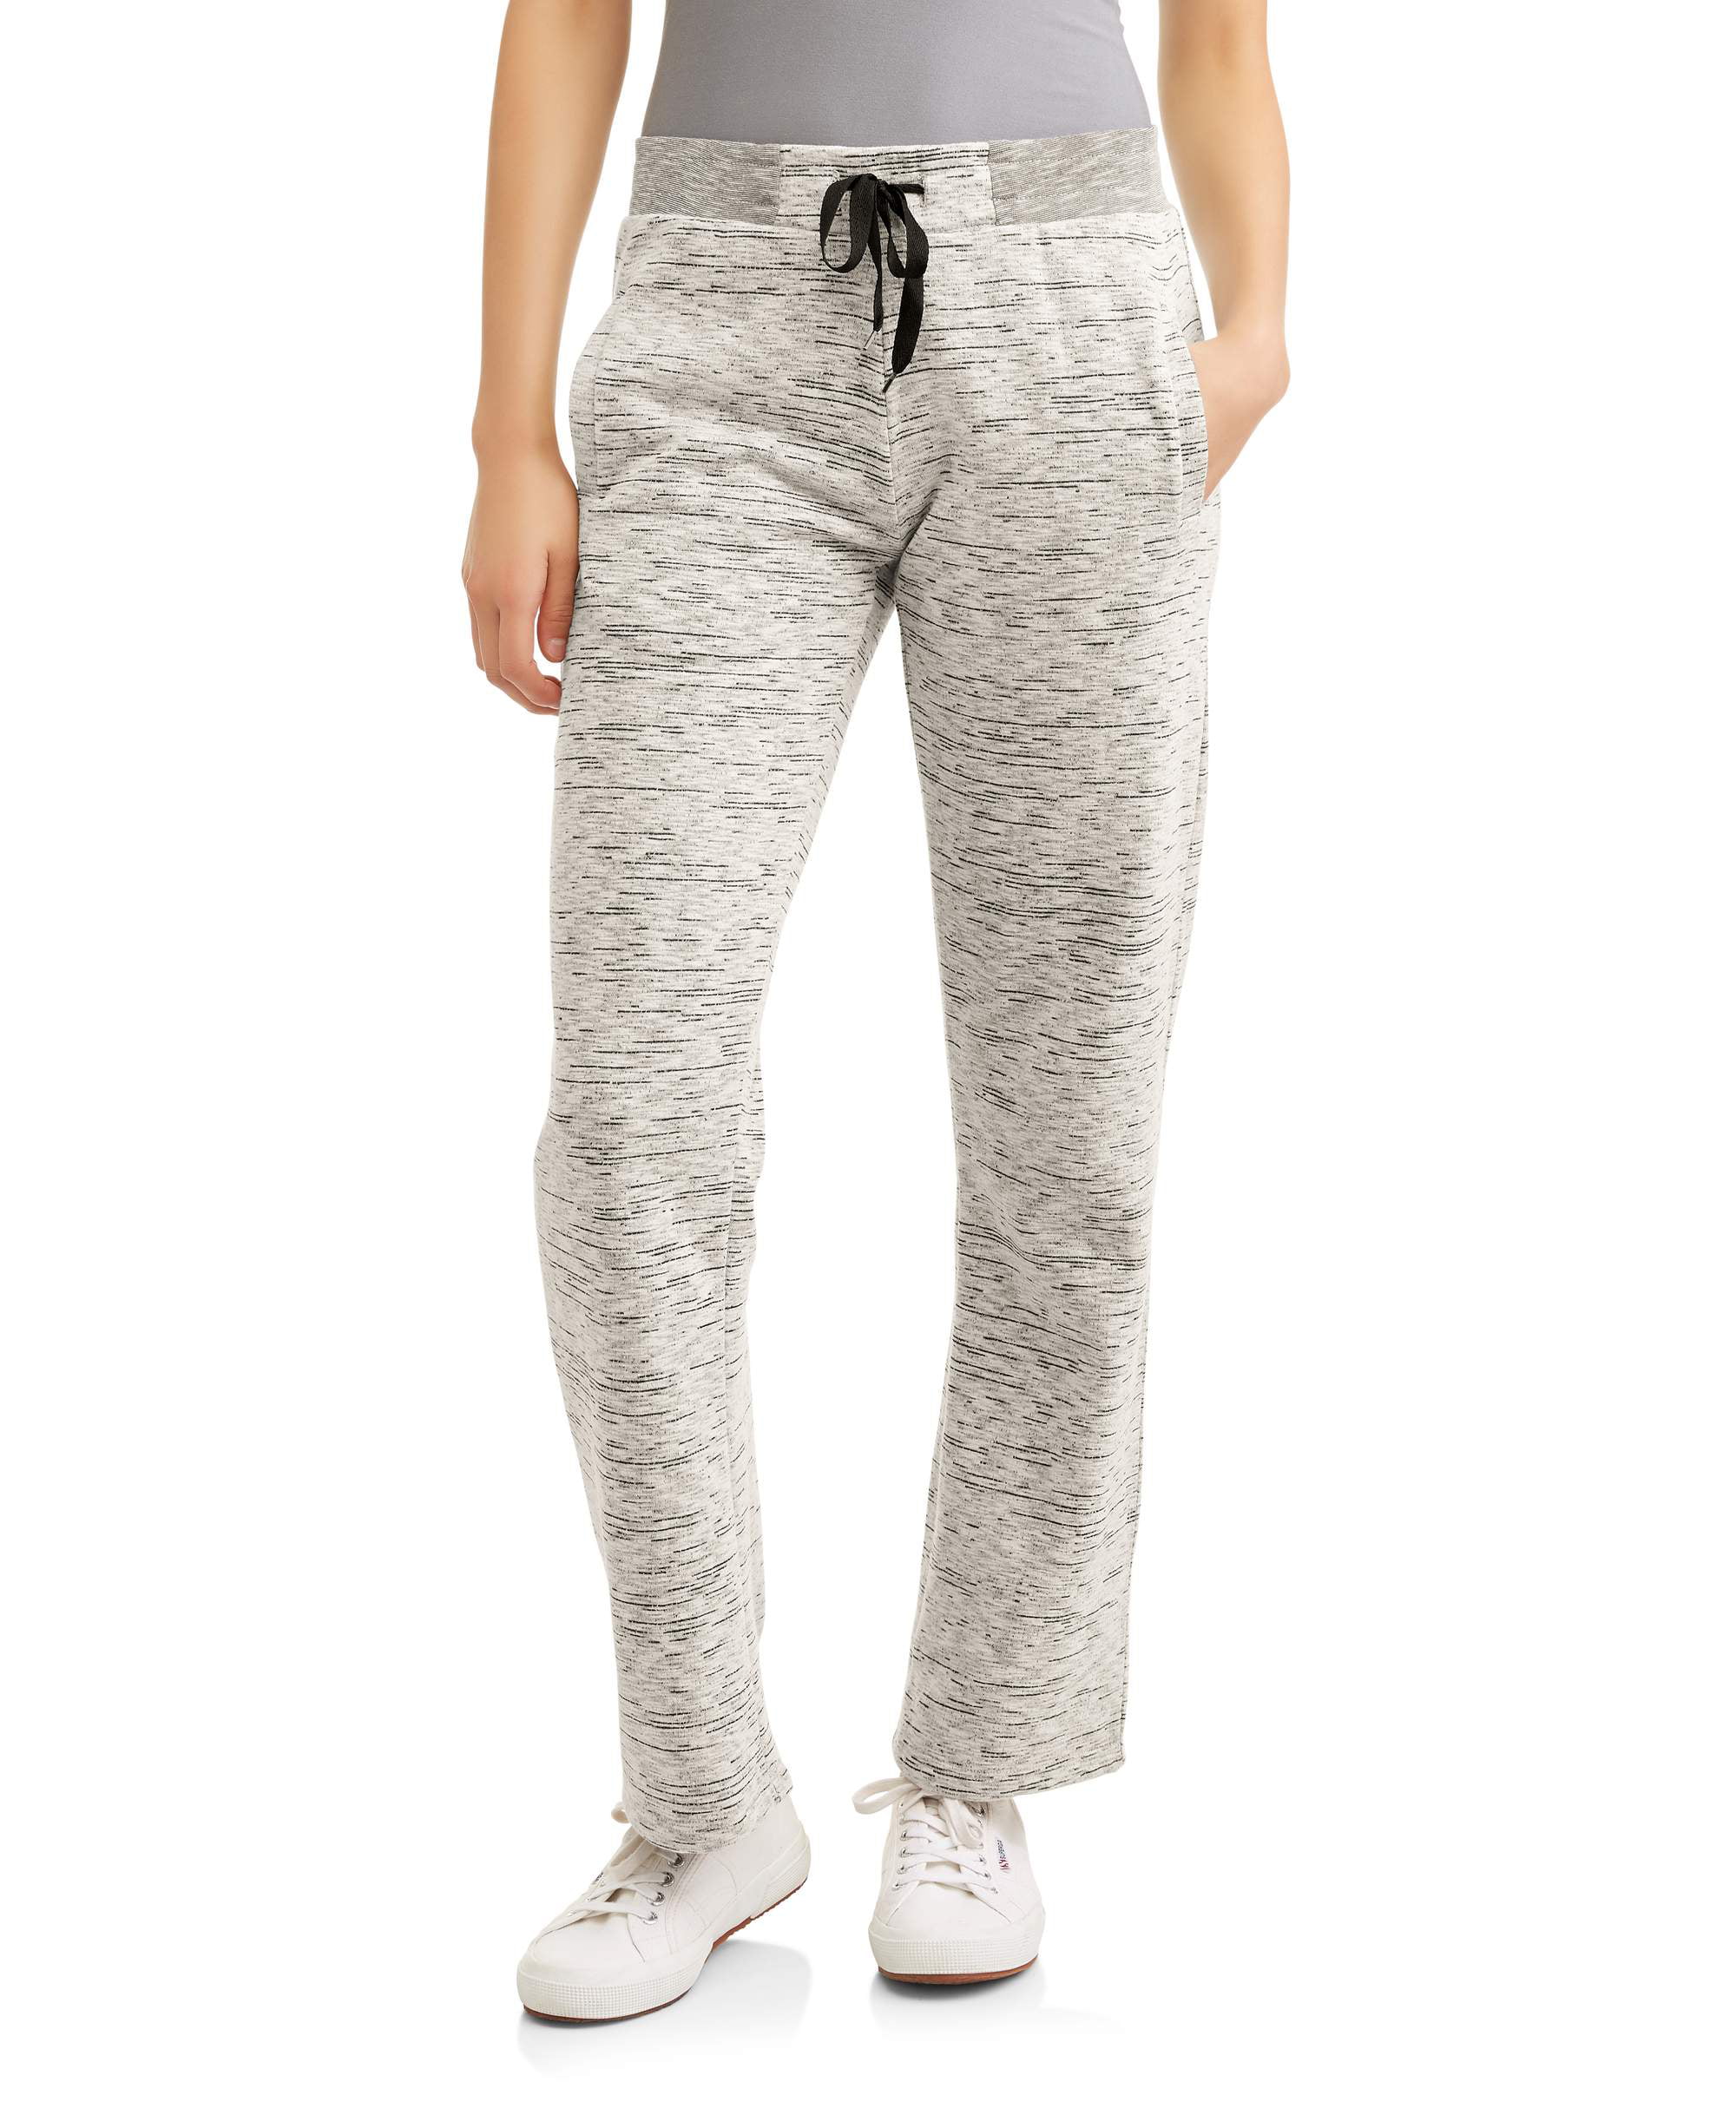 Thrill Women's Athleisure Cozy Fleece Relaxed Fit Pant - Walmart.com